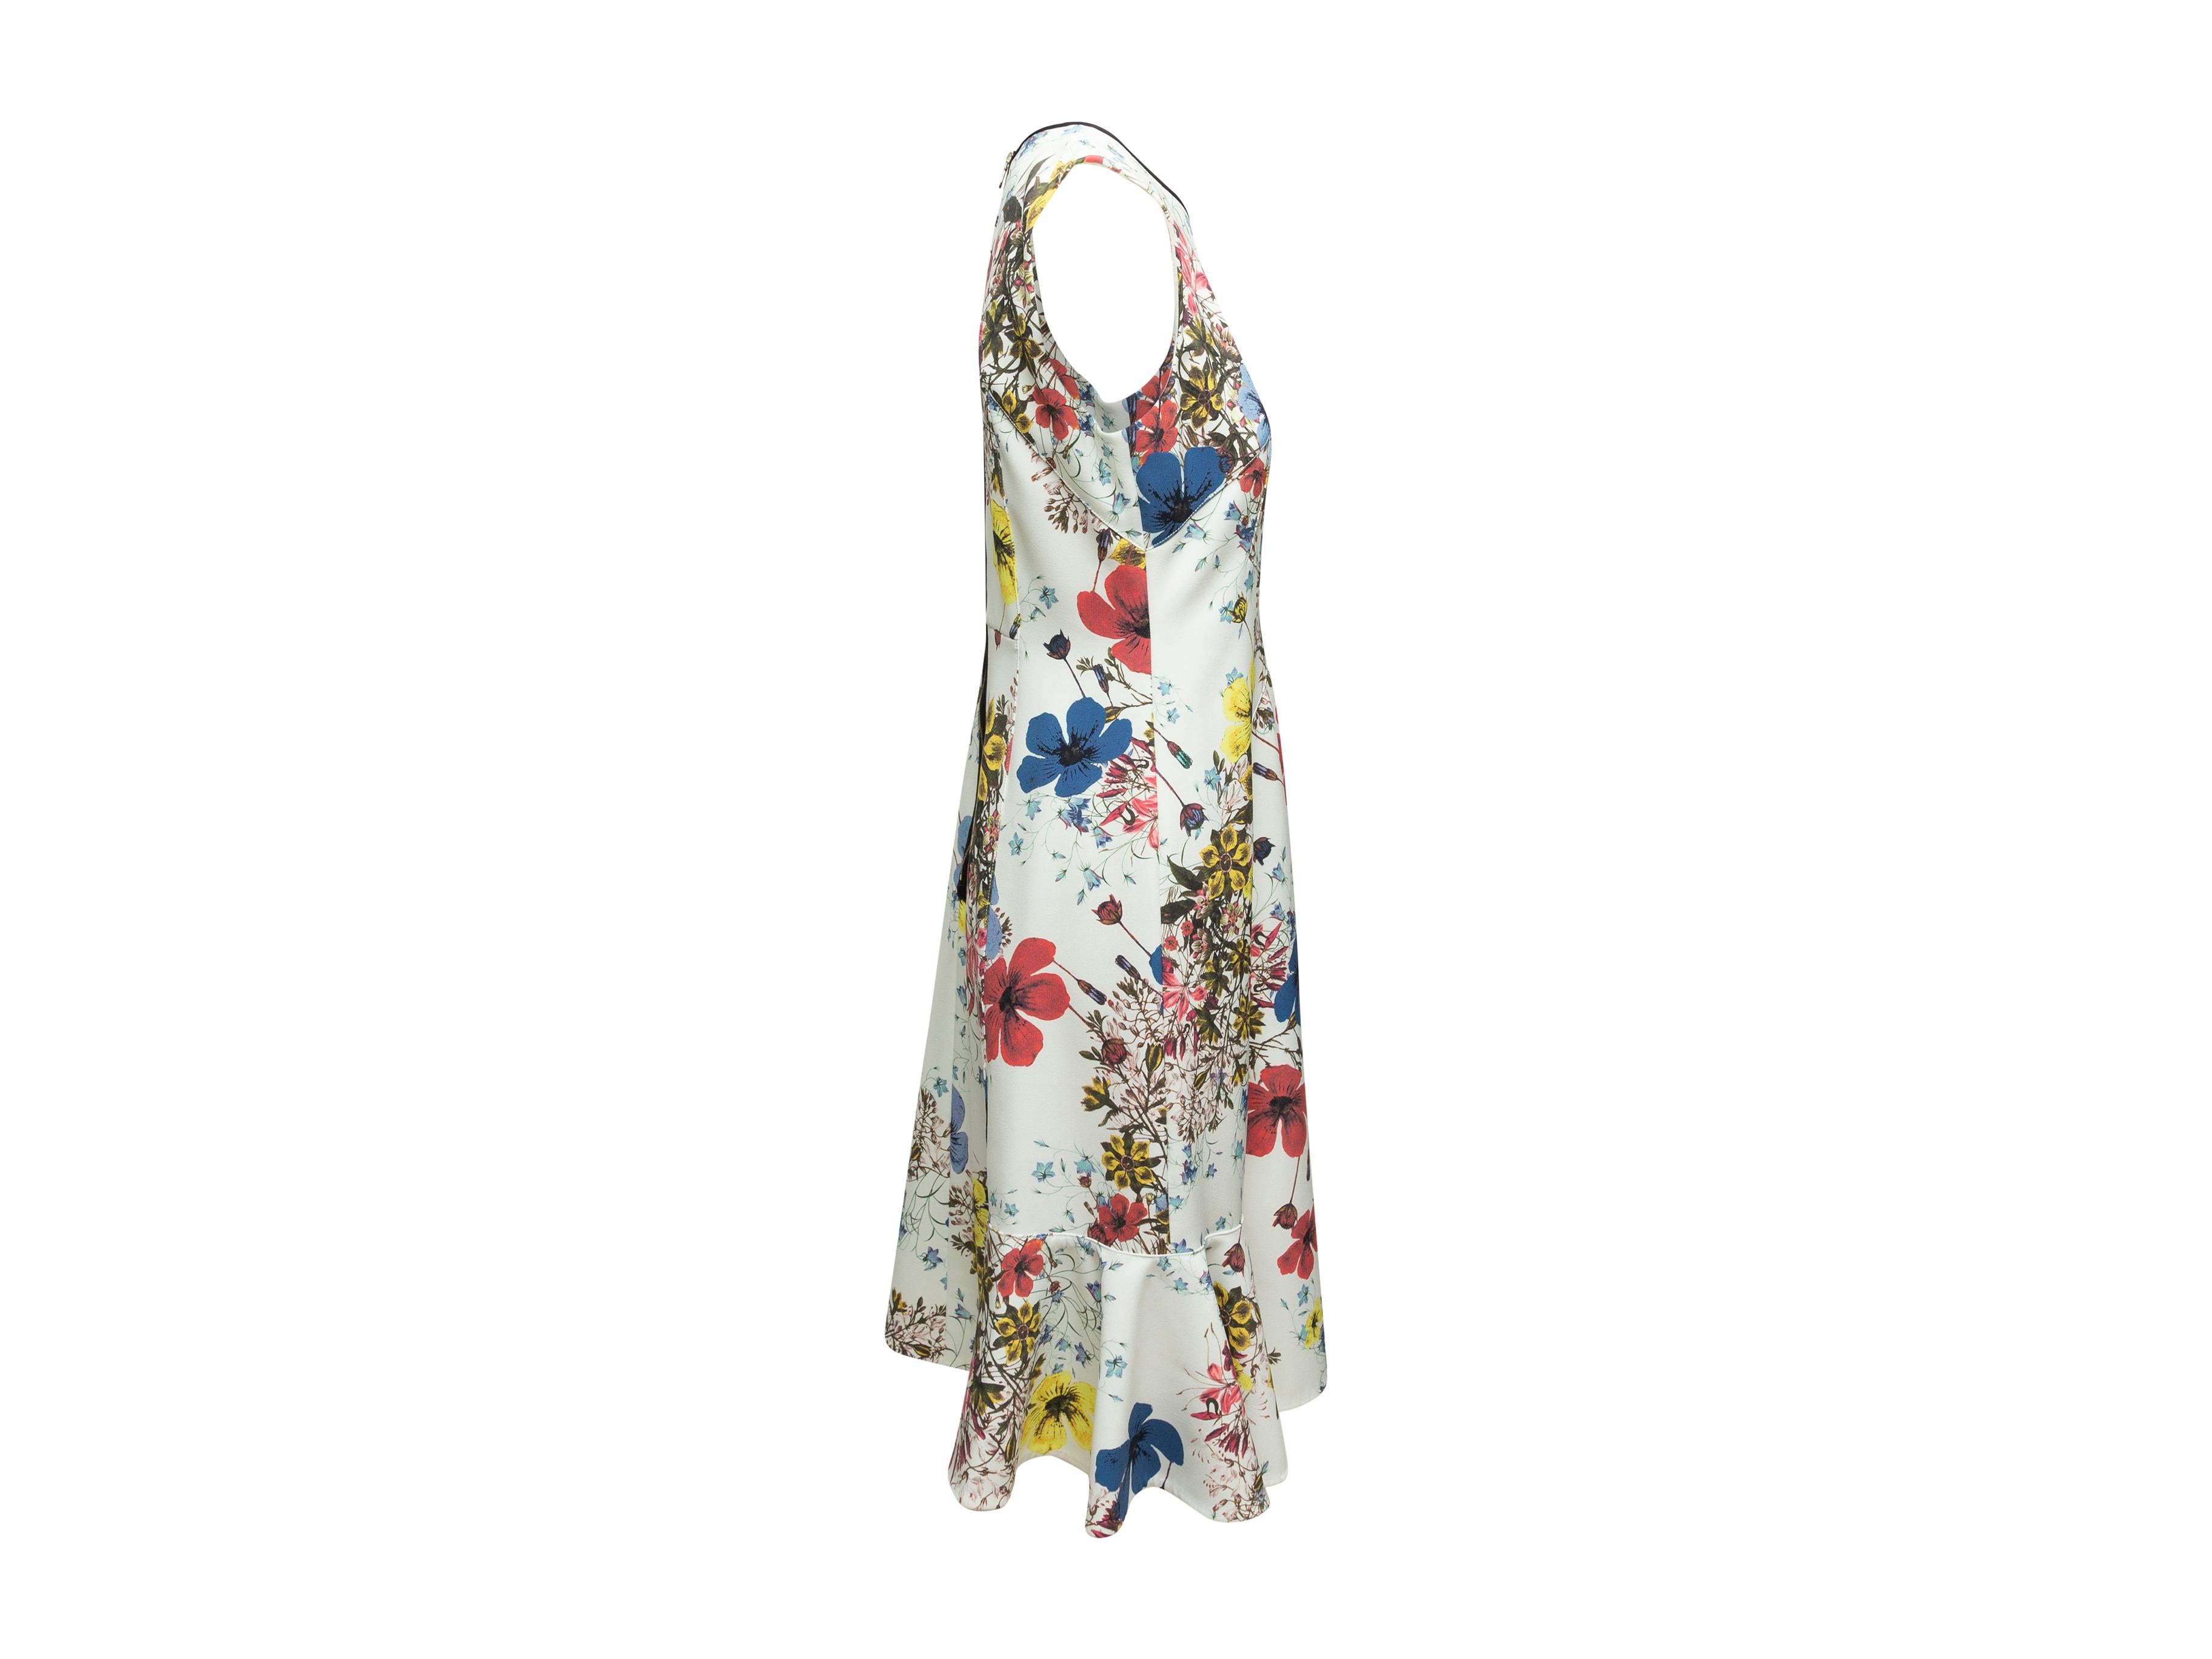 Product details: White and multicolor 'Jana' sleeveless dress by Erdem. Floral print throughout. Crew neck. Zip closure at back. 36